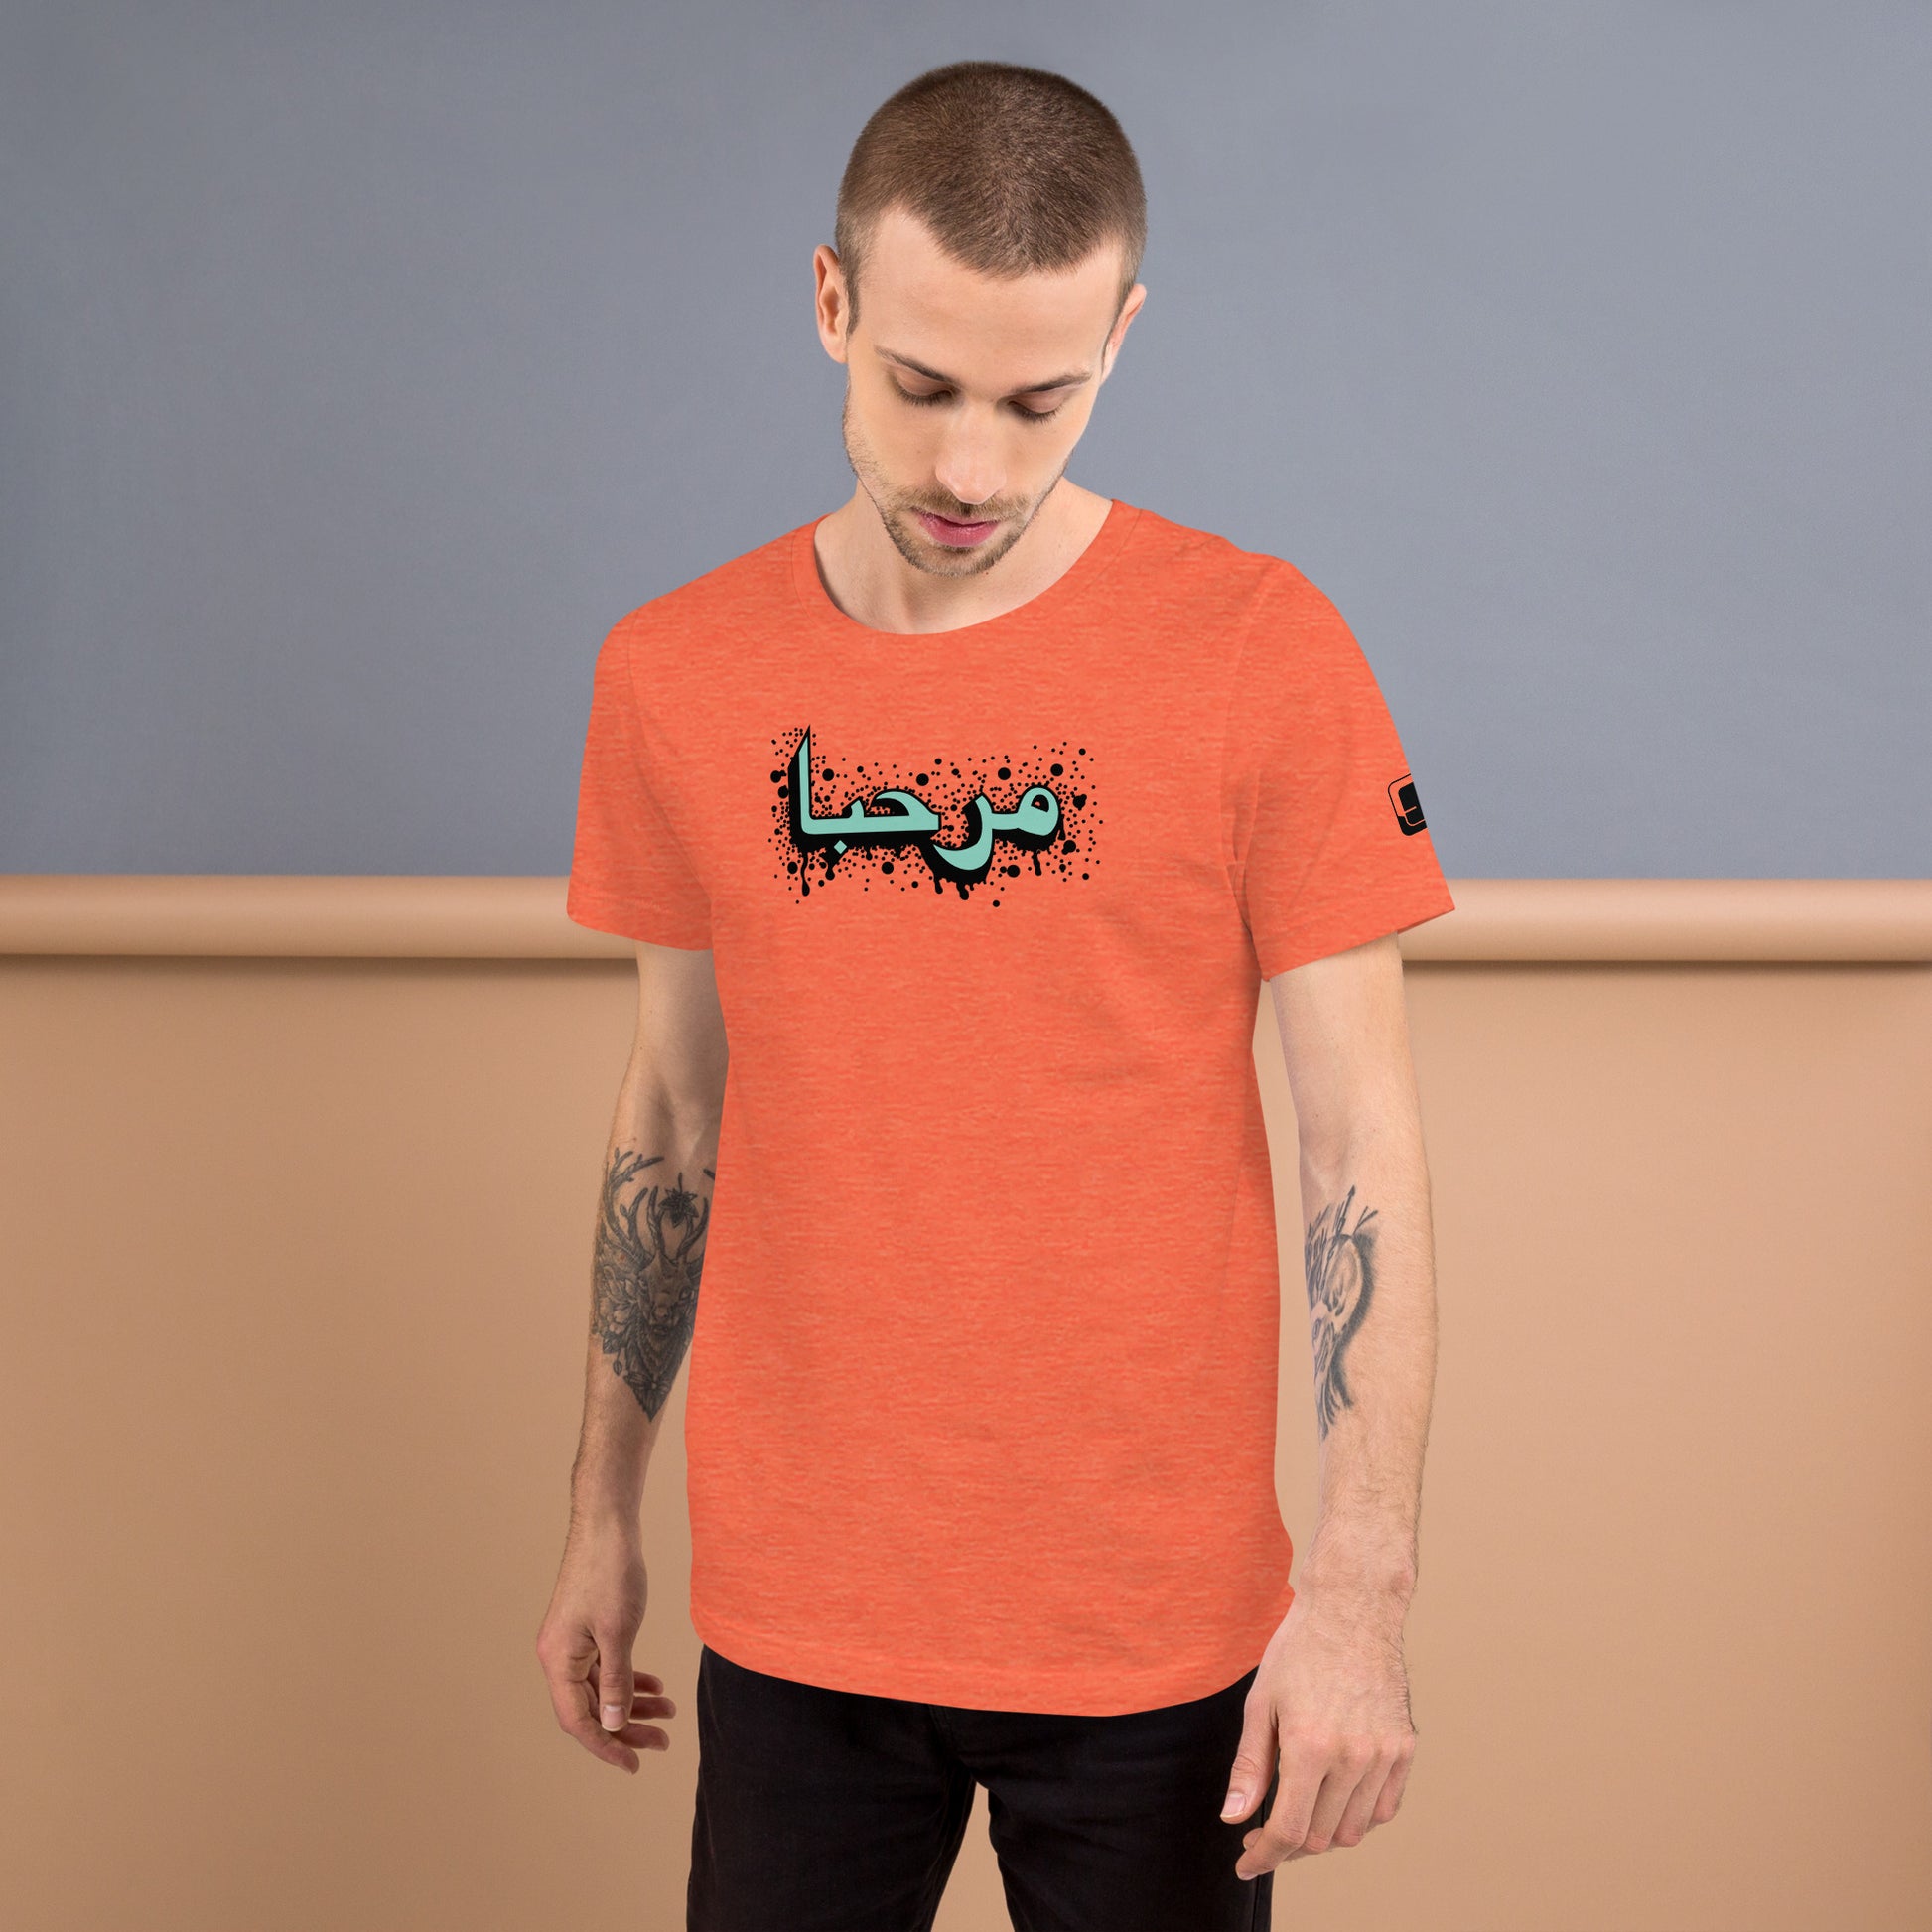 Man with tattoos on his arms looking down, wearing a heather orange t-shirt with a central turquoise Arabic calligraphy design accented with  black splattered ink details, standing against a blue and peach color wall wall. 